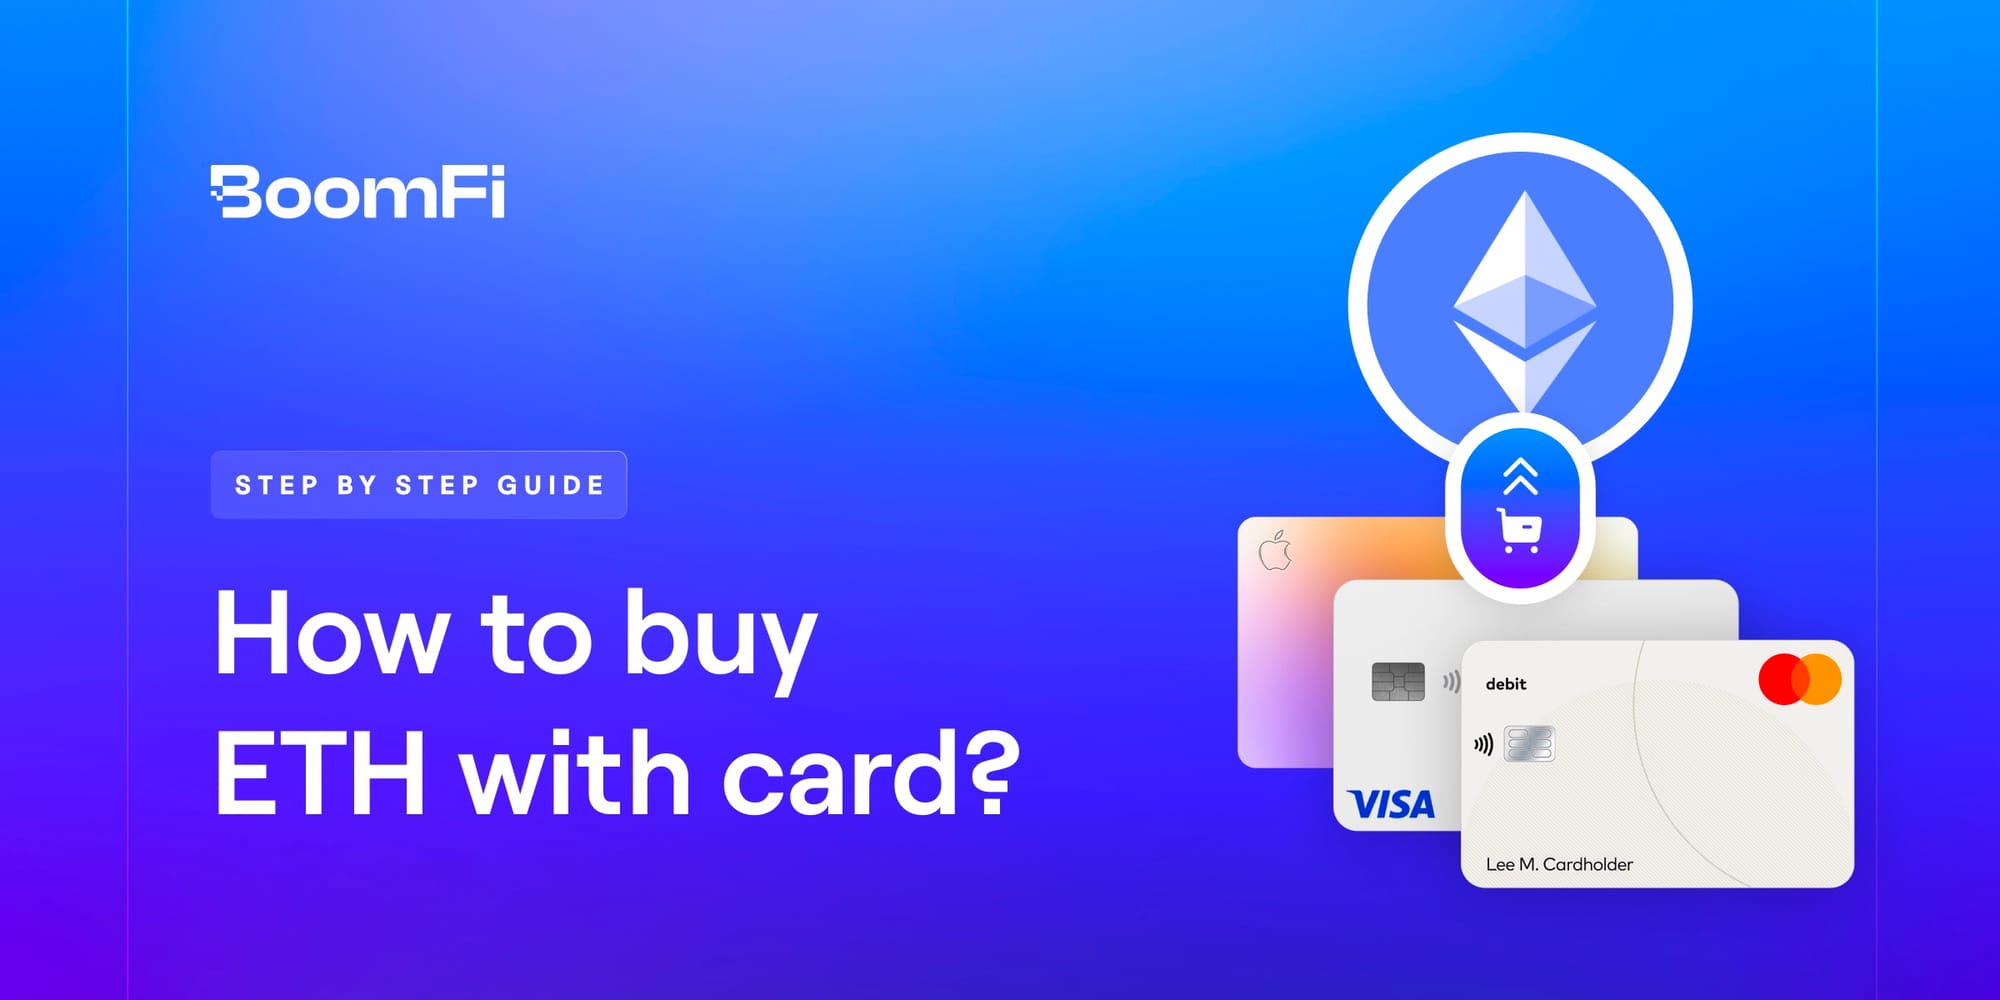 How to Buy Ethereum (ETH) with a Credit or Debit Card